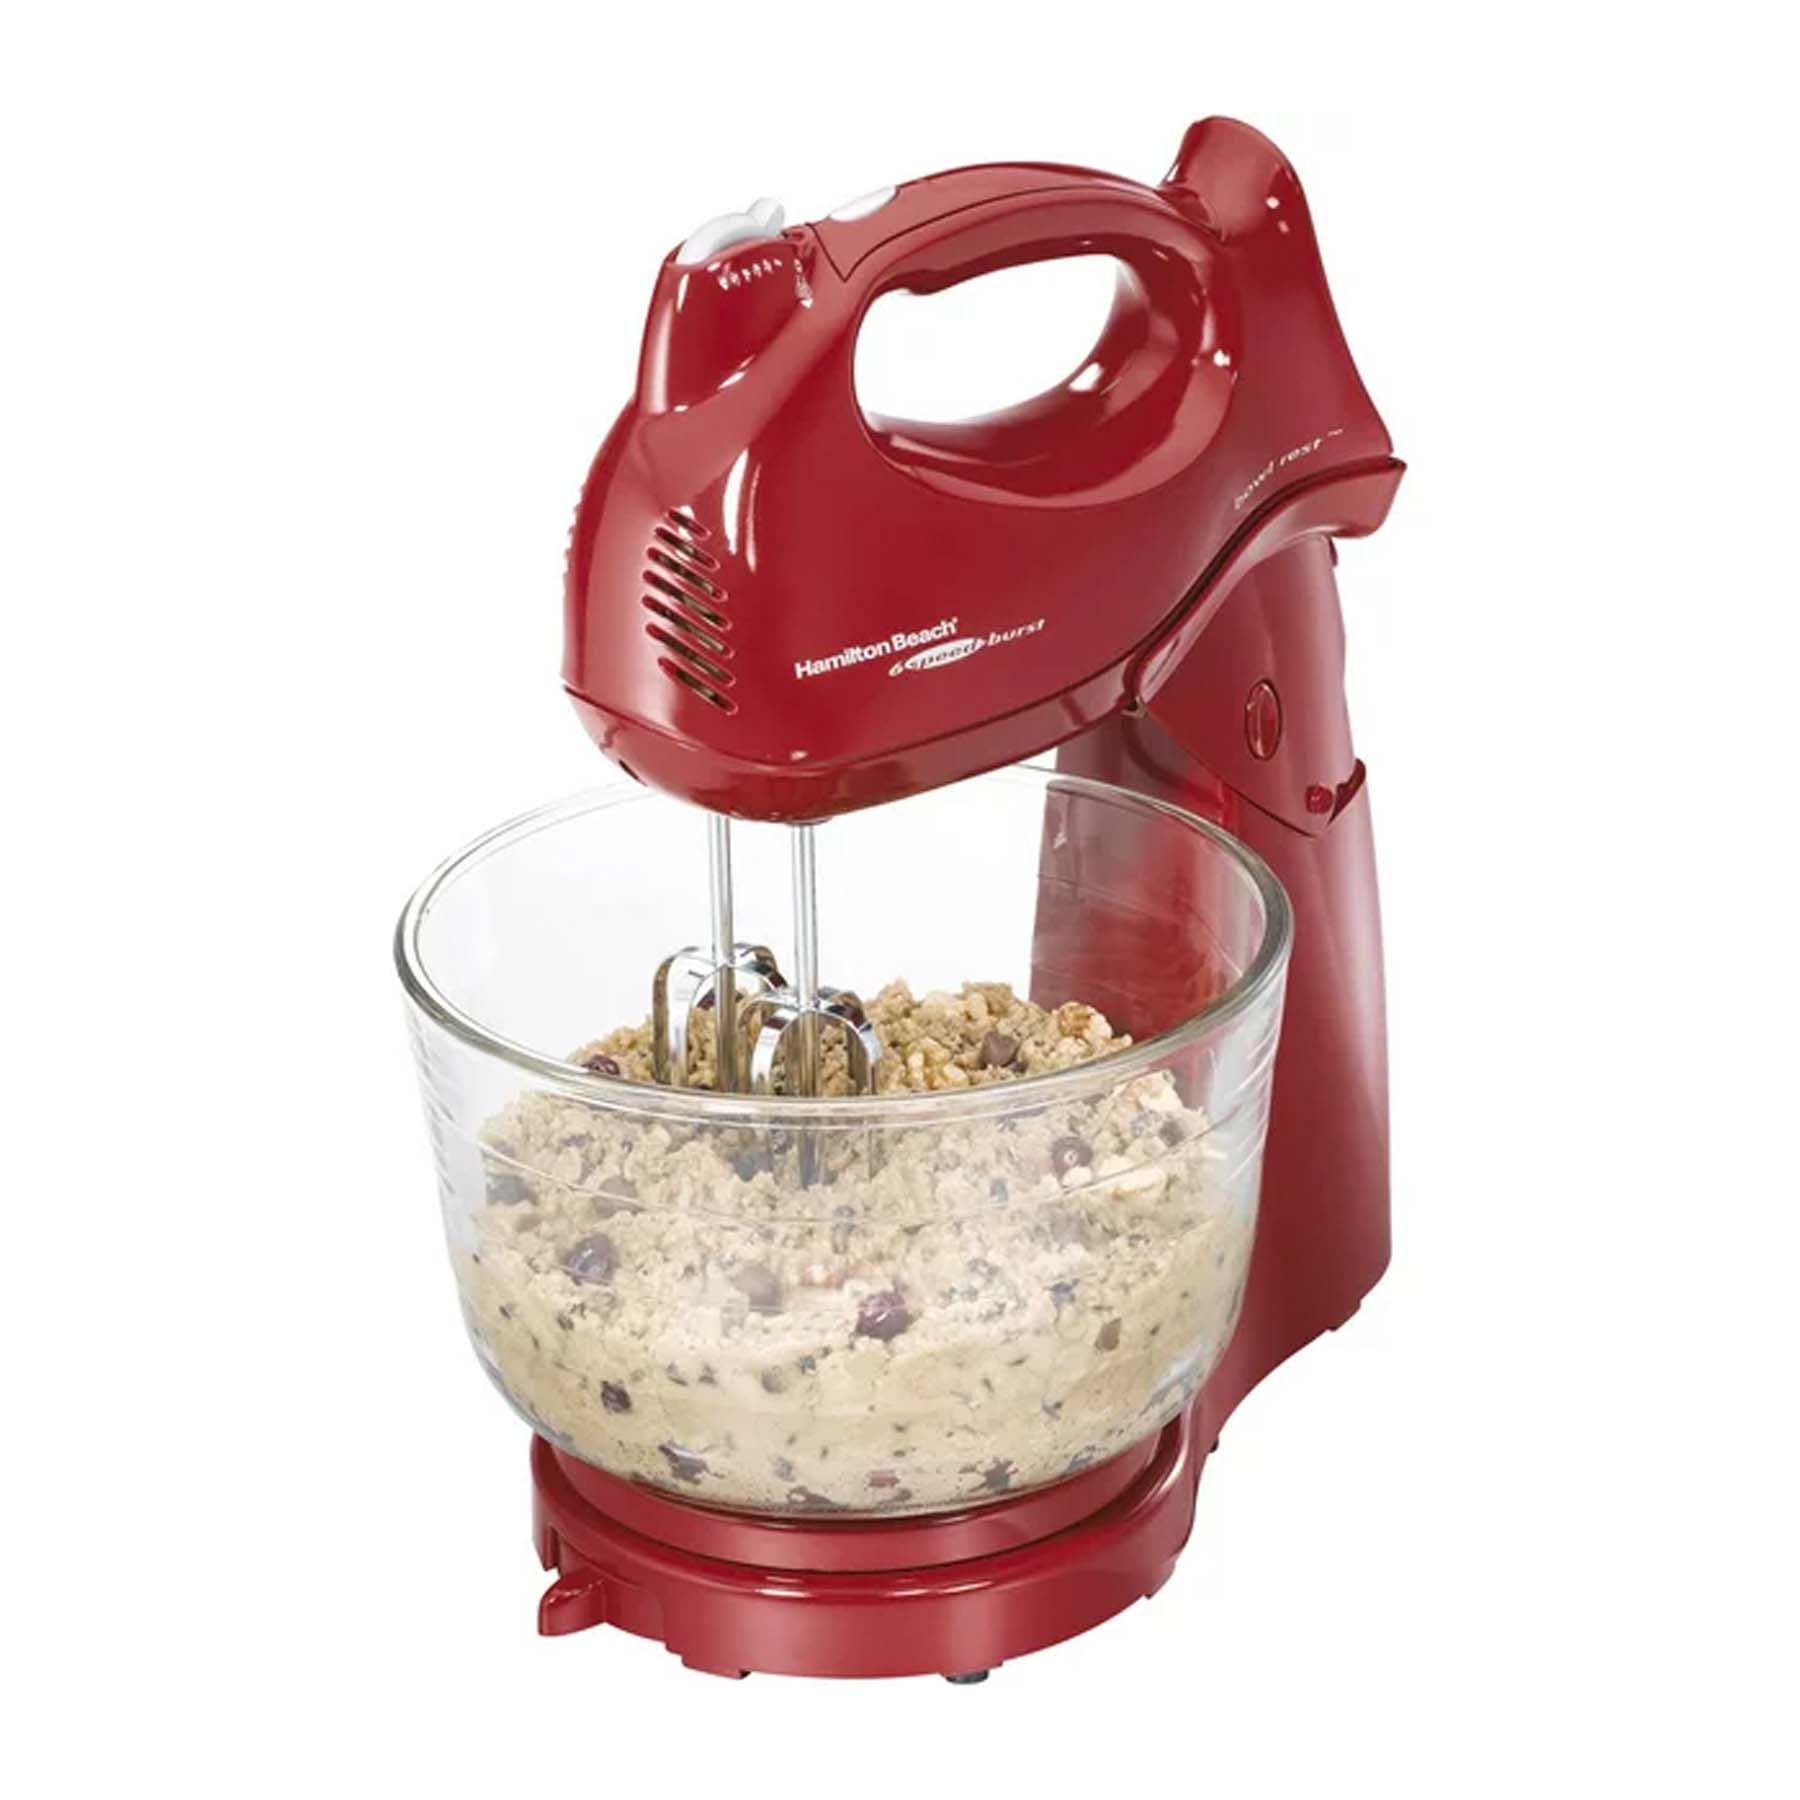 https://video-images.vice.com//products/6408f792b0f53f1ac5503ccc/gallery-image/1678309266564-best-stand-mixers-hamilton-beach-power-deluxe-stand-mixer.jpeg?crop=1xw:0.5231092436974789xh;center,center